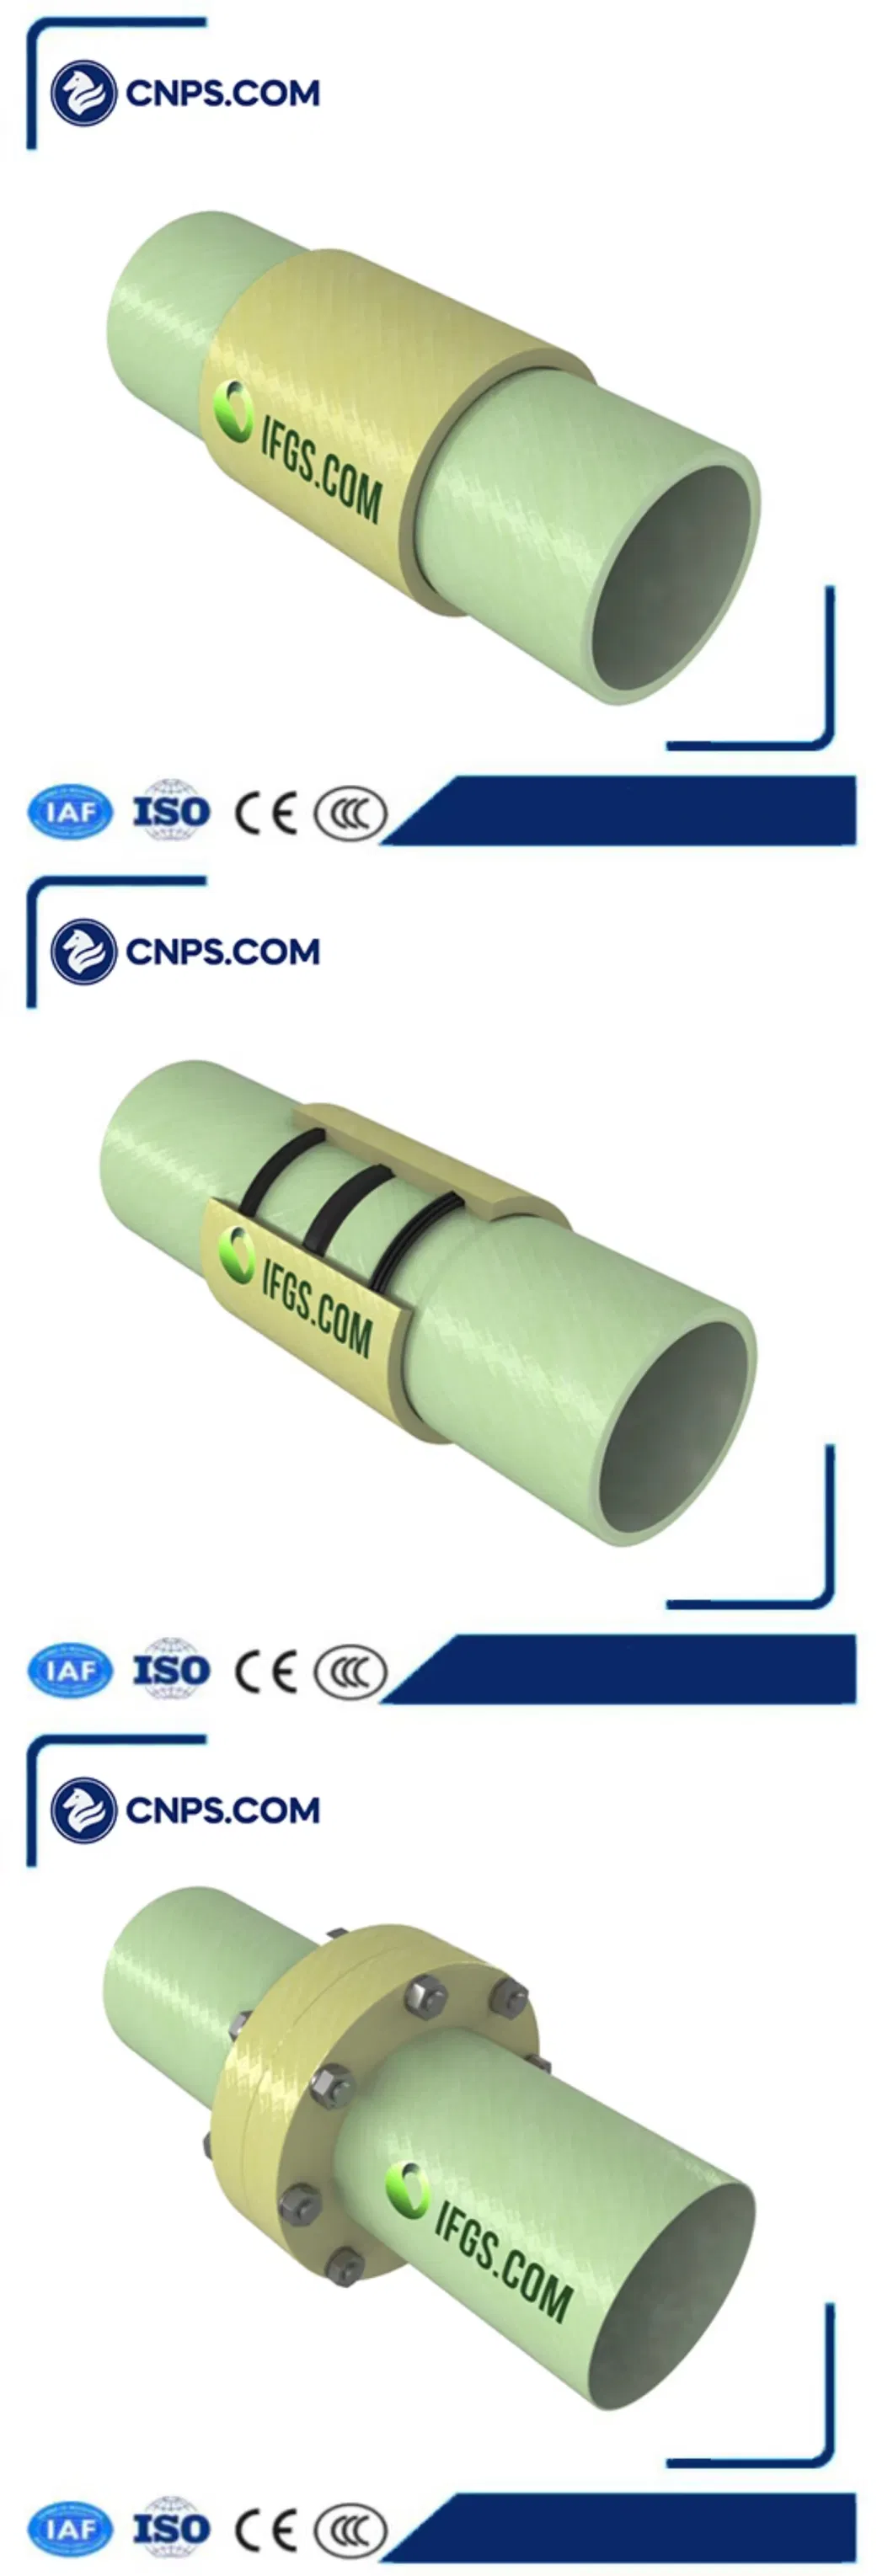 High Strength OEM FRP/GRP Reinforced Fiberglass Pipes and Fittings